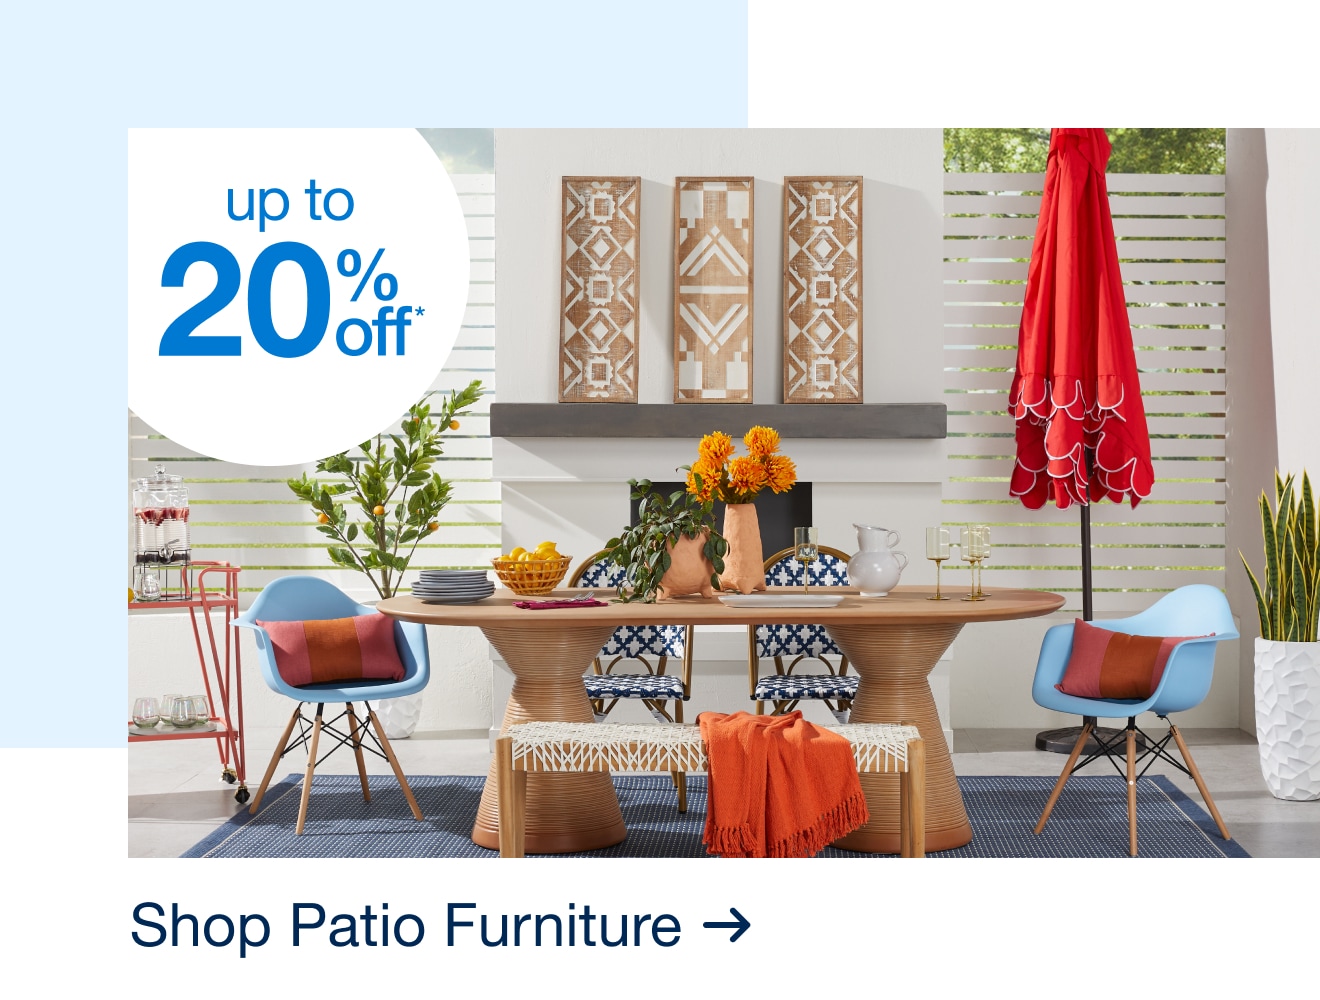 Up to 20% off - Shop Patio Furniture